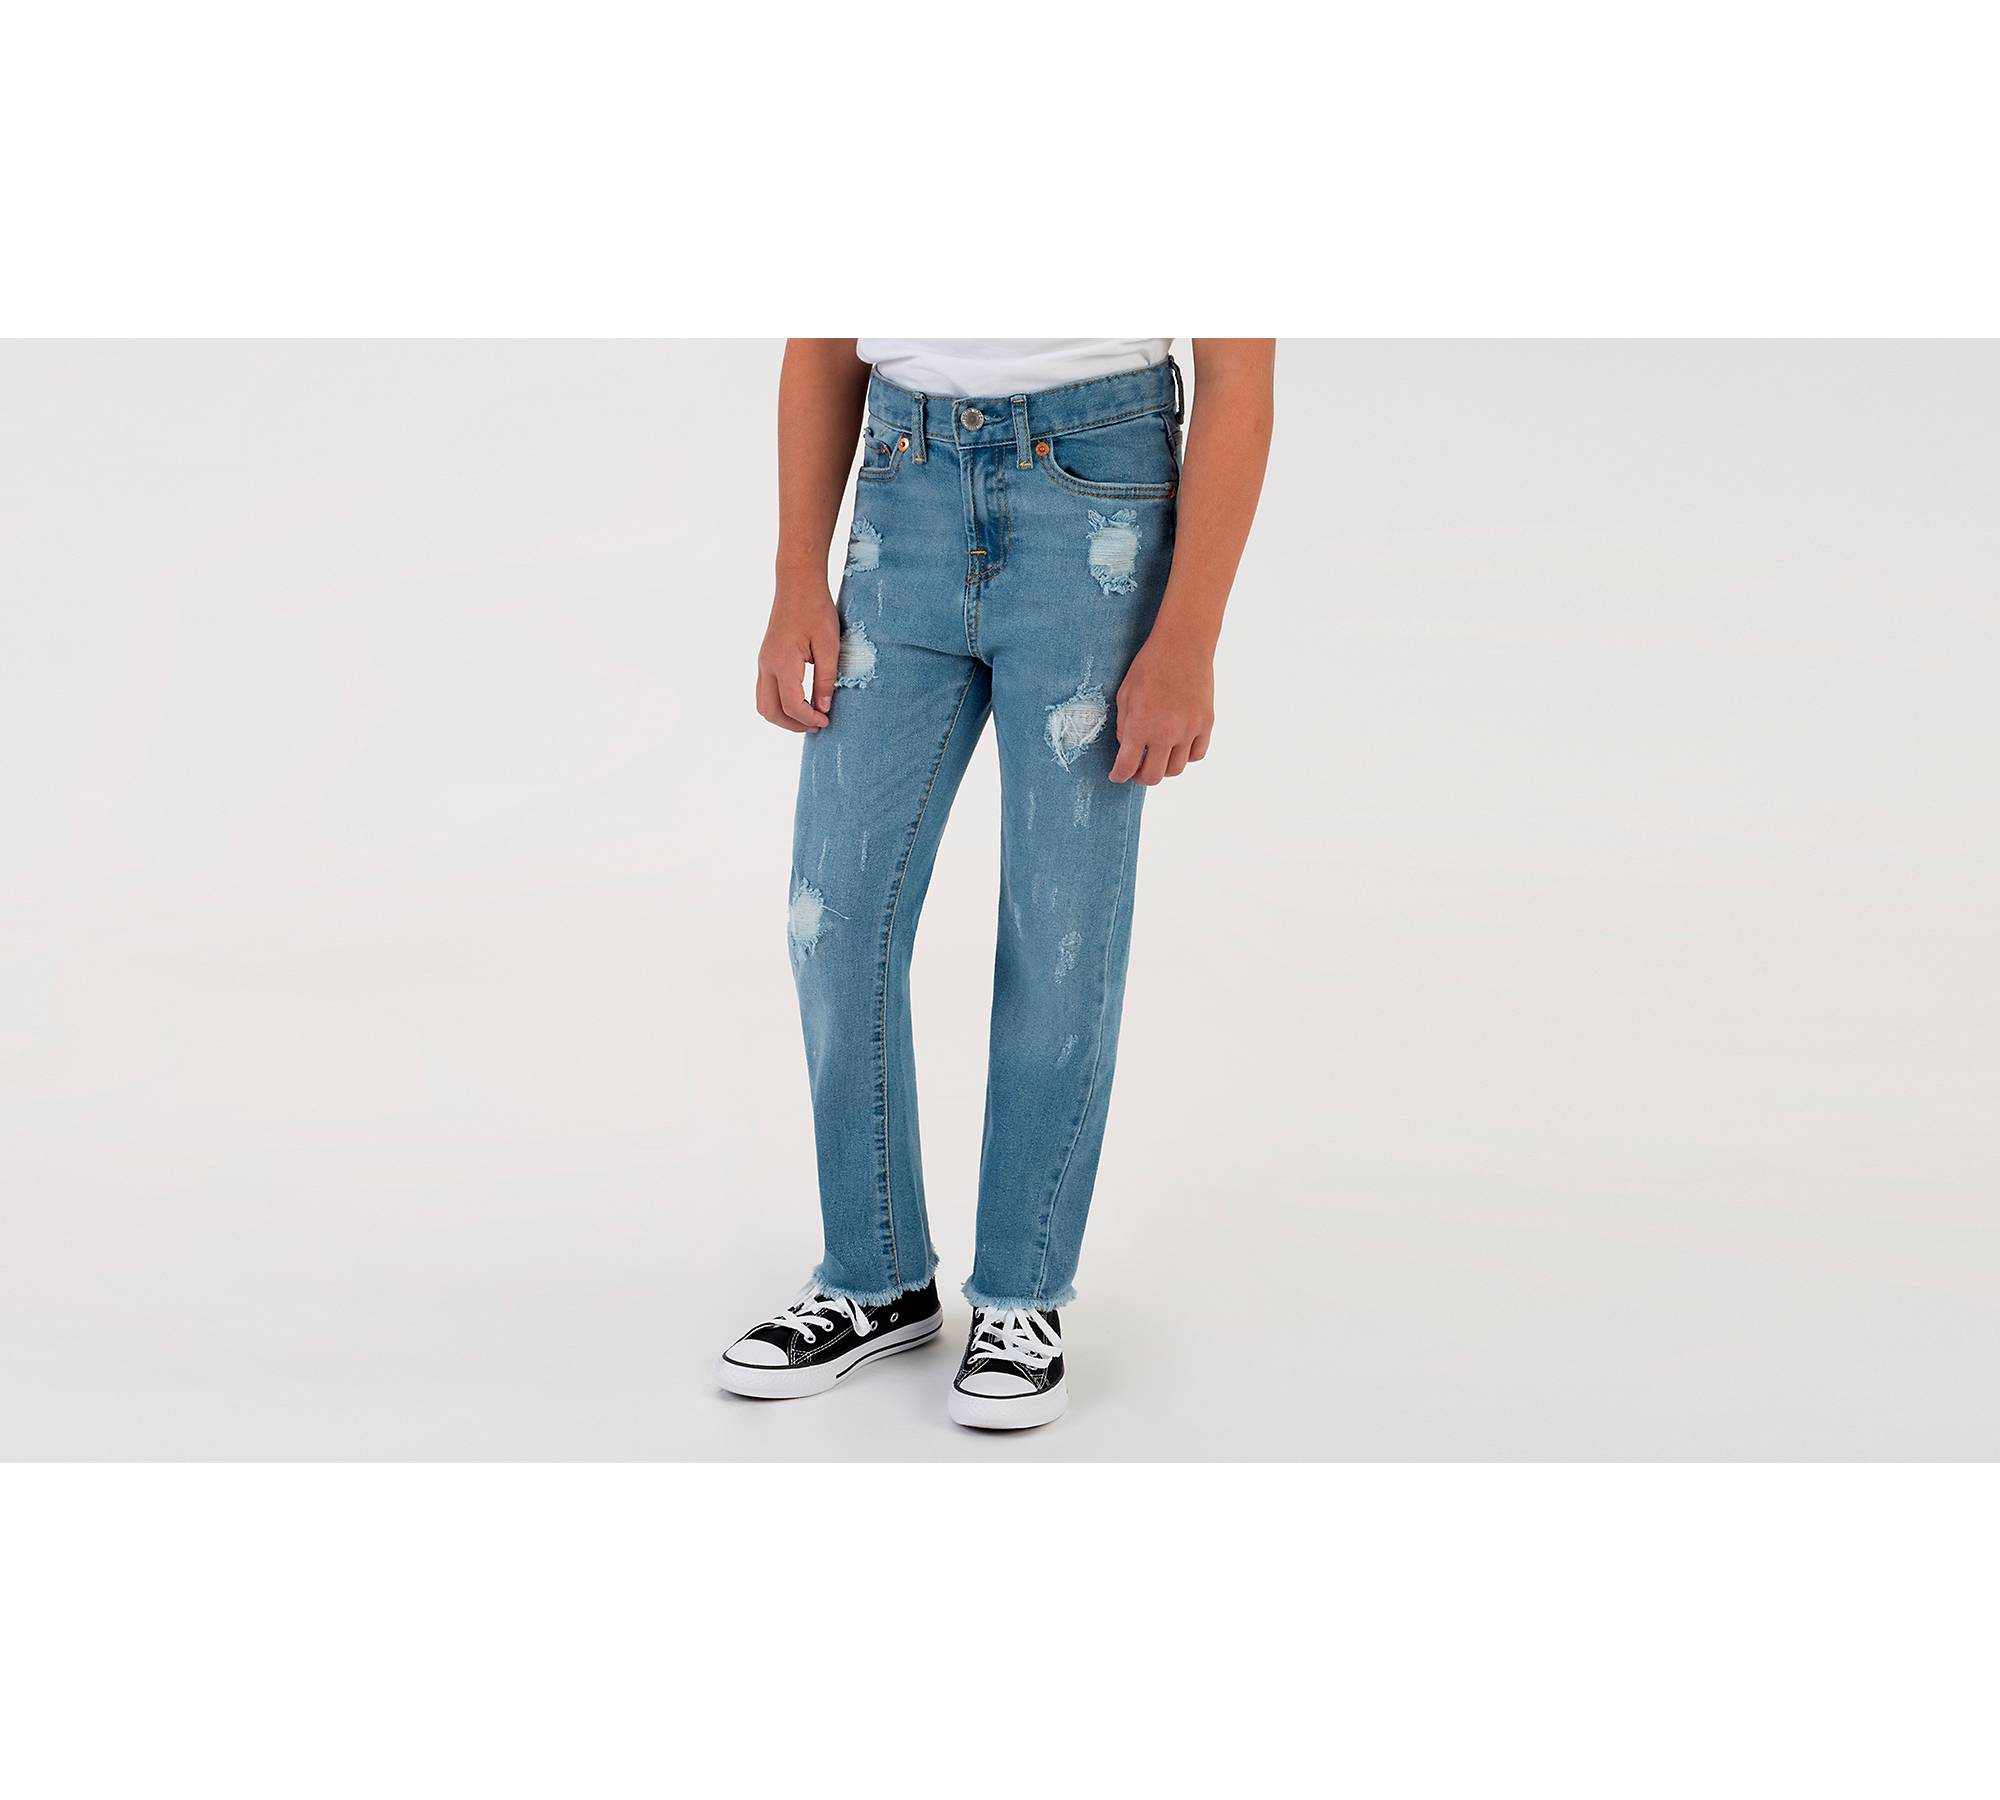 High Rise Ankle Straight Big Girls Jeans 7-16 1